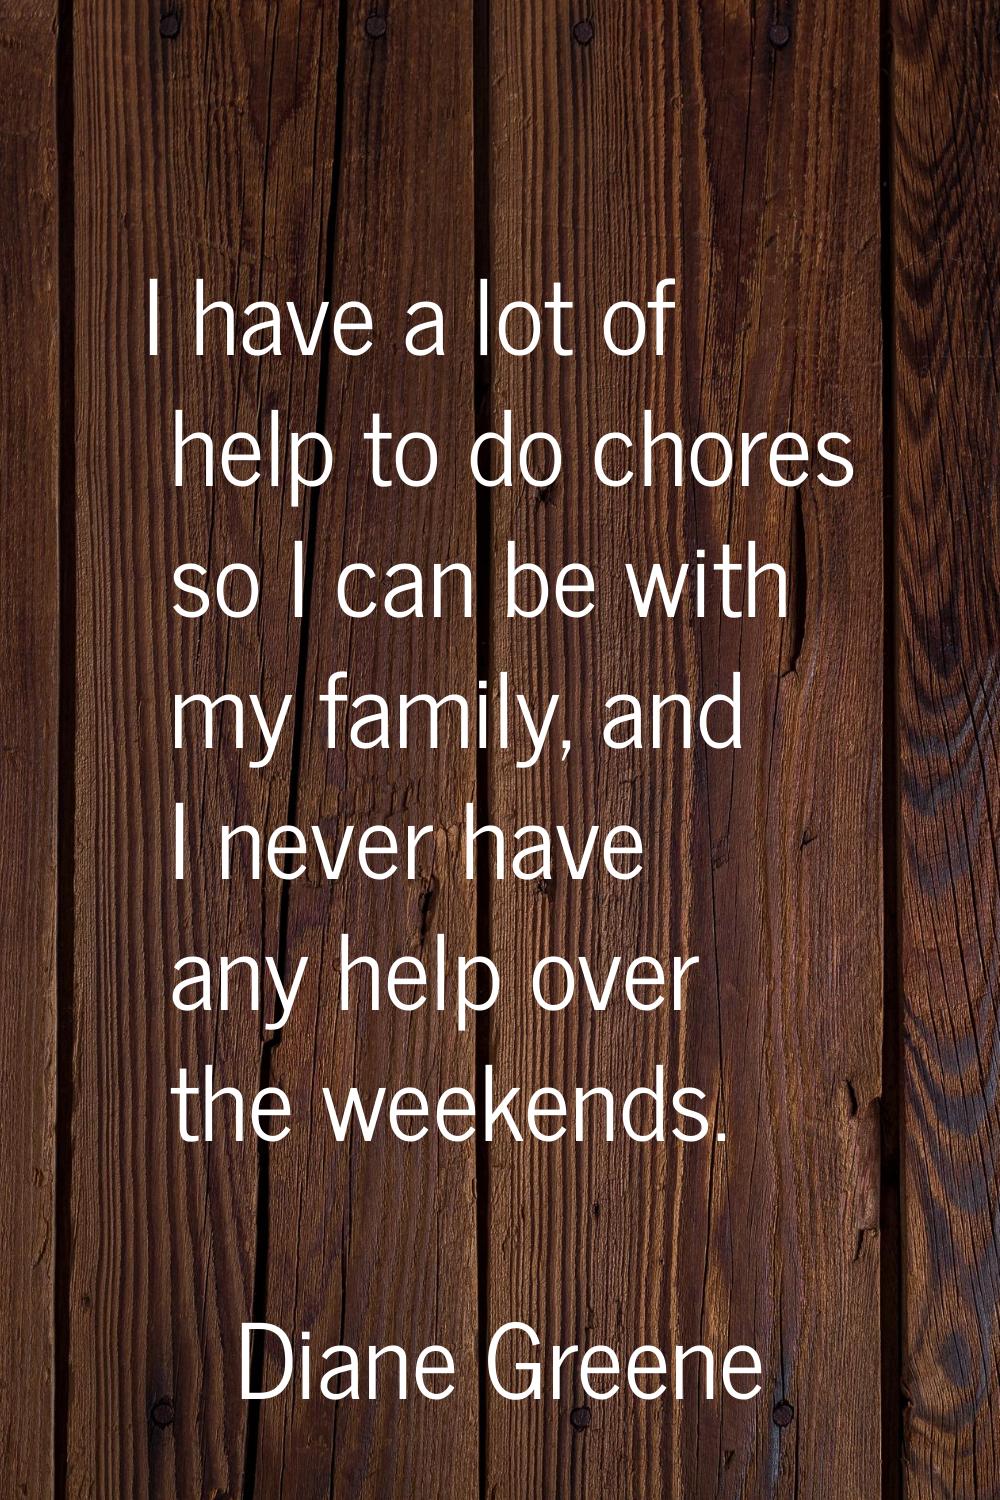 I have a lot of help to do chores so I can be with my family, and I never have any help over the we